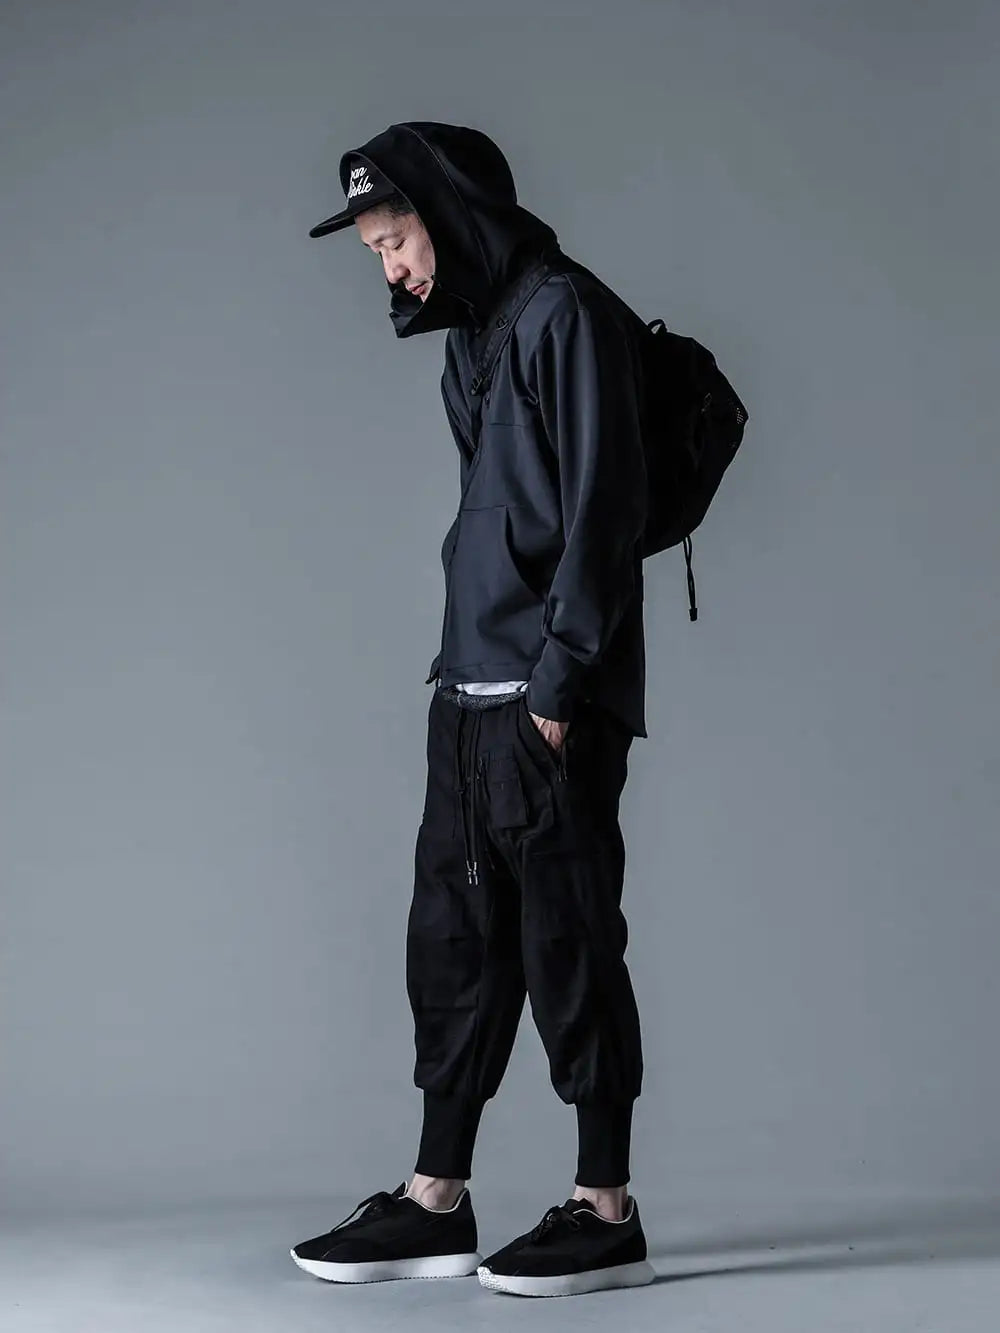 RIPVANWINKLE 24SS Styling - Proposing comfortable everyday wear with hooded jersey and RVW trainers that can be used immediately - RW-151 (FLOPPY CAP) - RW-629 (Hooded Jersey) - RW-639(Balloon Parachute) - RW-615(Rip Trainer Two Black) 1-002